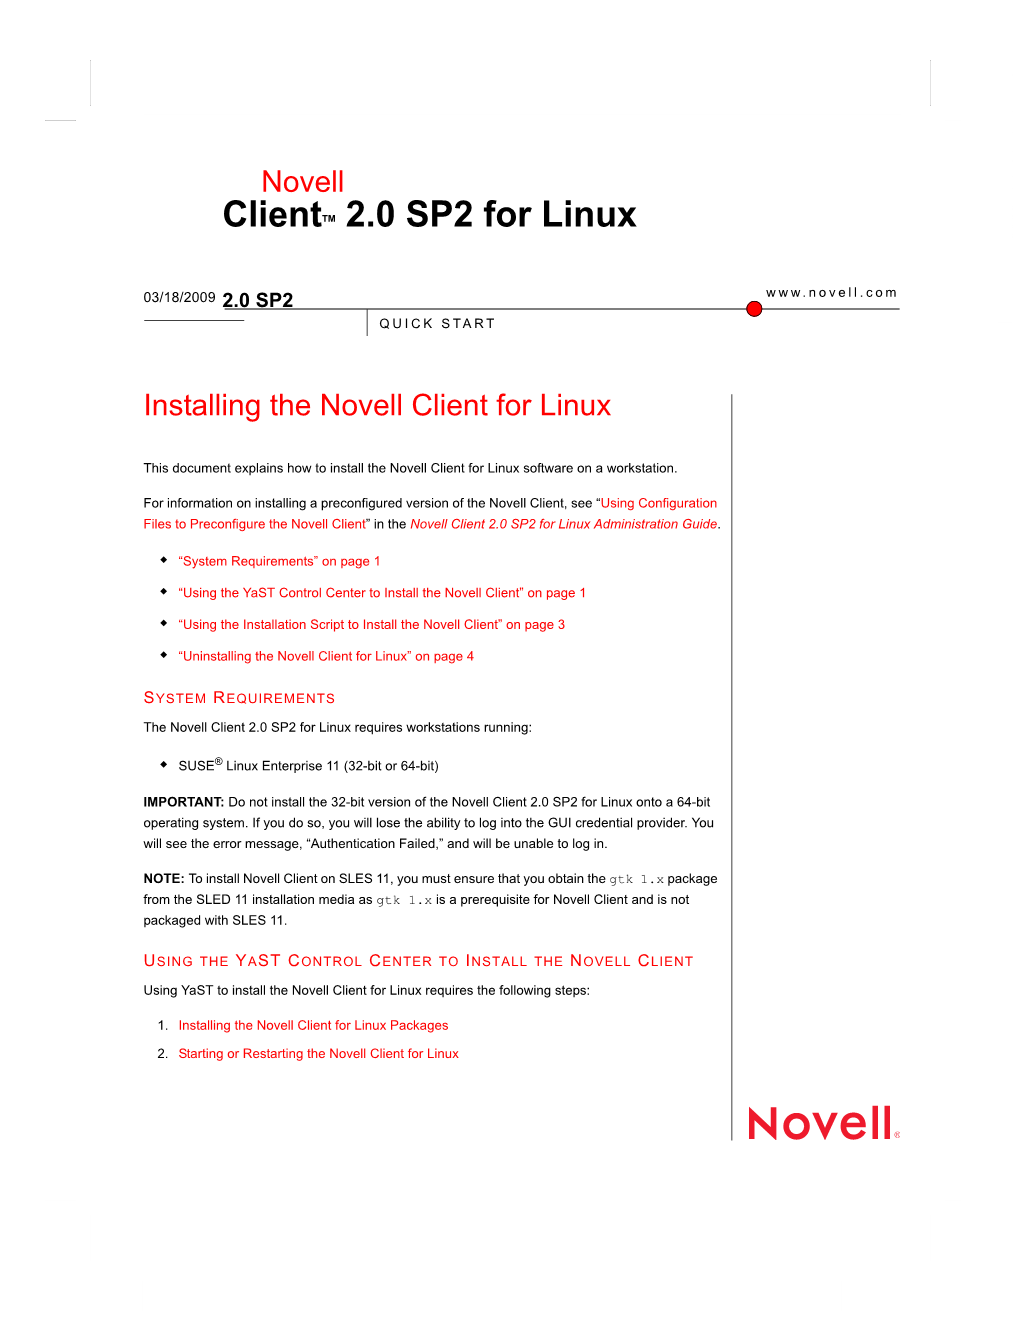 Novell Client 2.0 SP2 for Linux Installation Quick Start